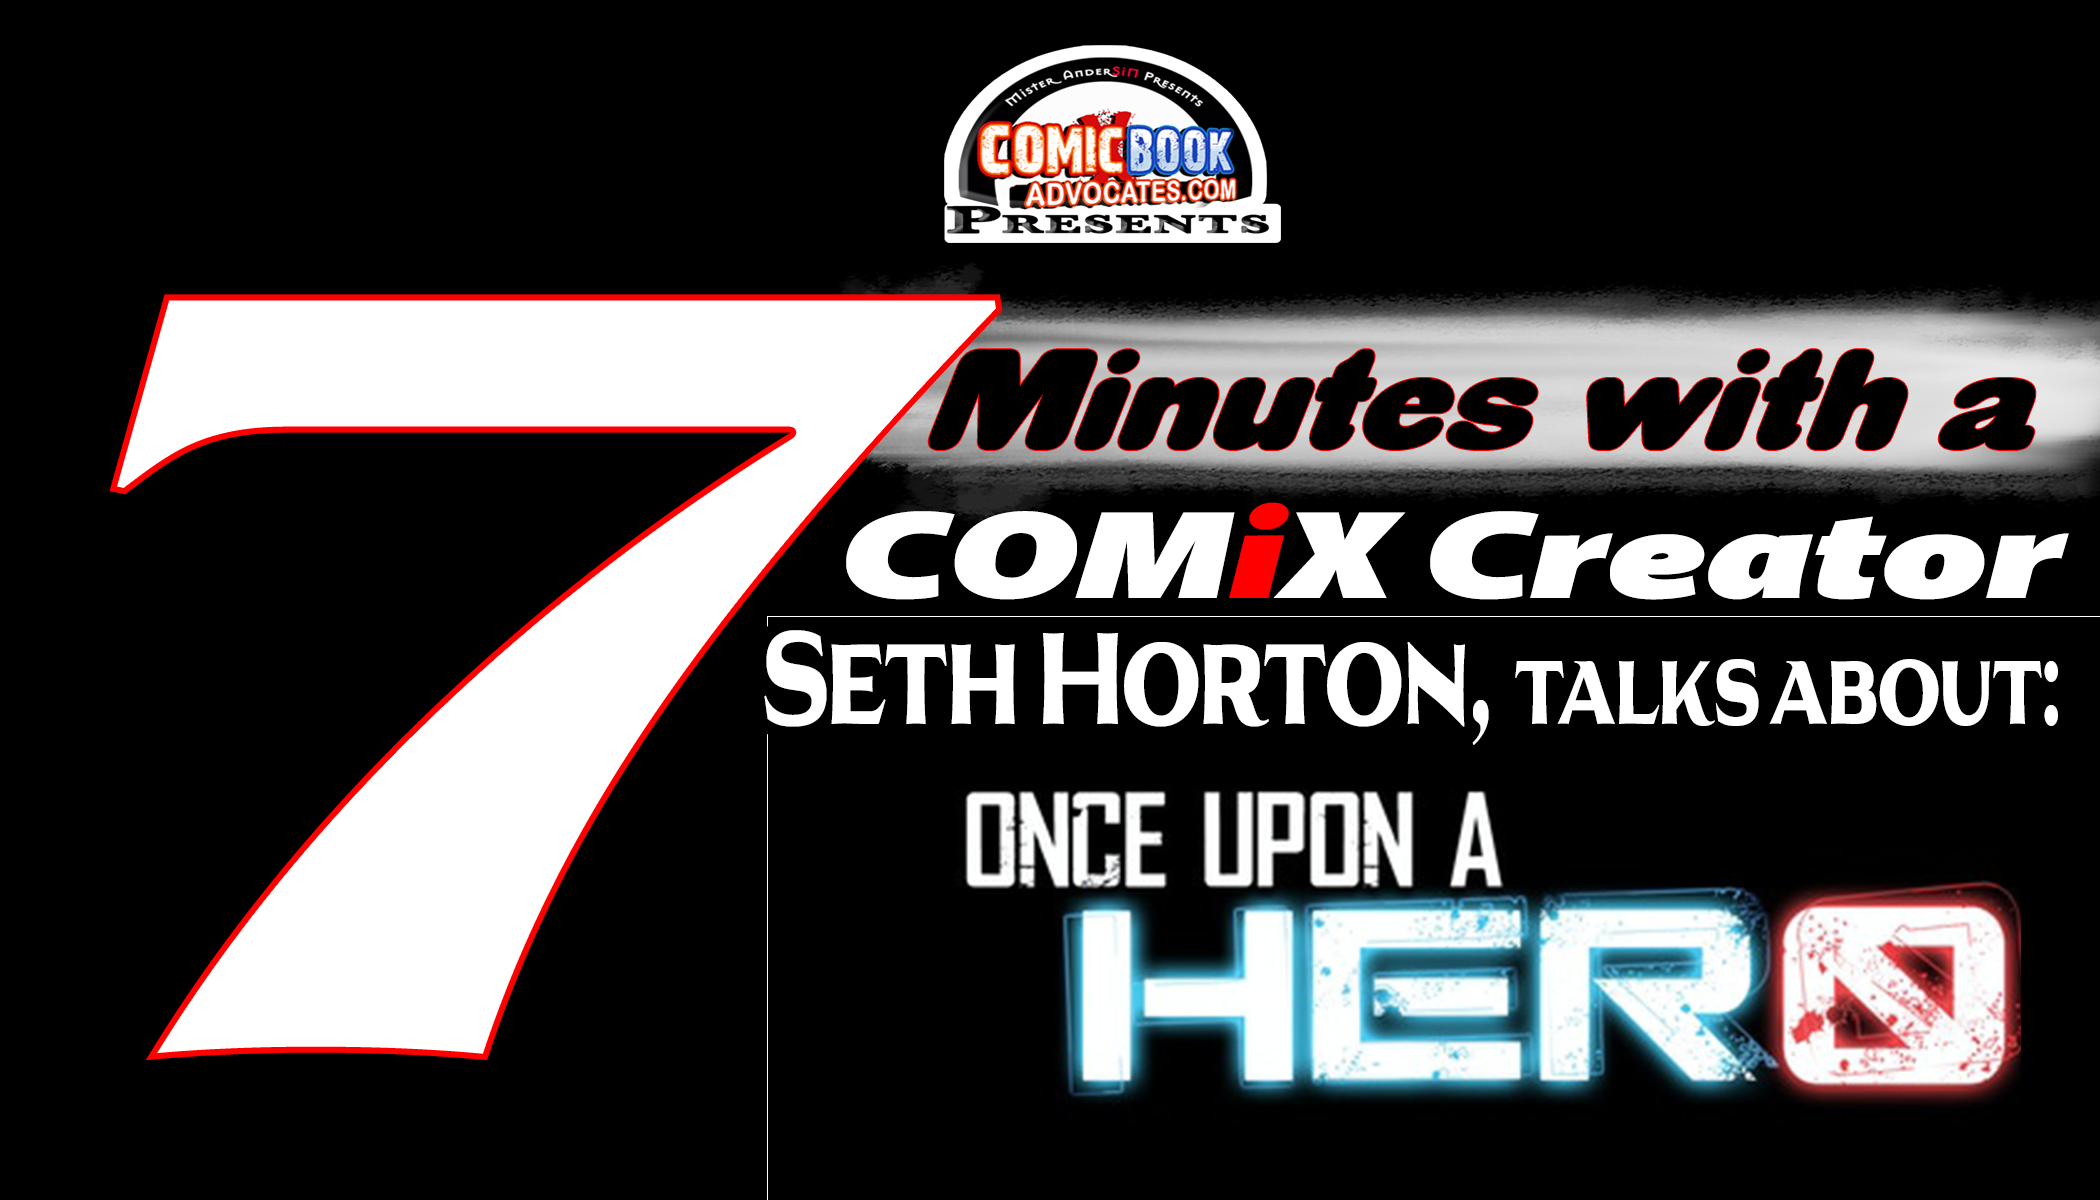 7 mins with Seth Horton & Once Upon A Hero #1-off the COMiXNEWSWiRE.com .